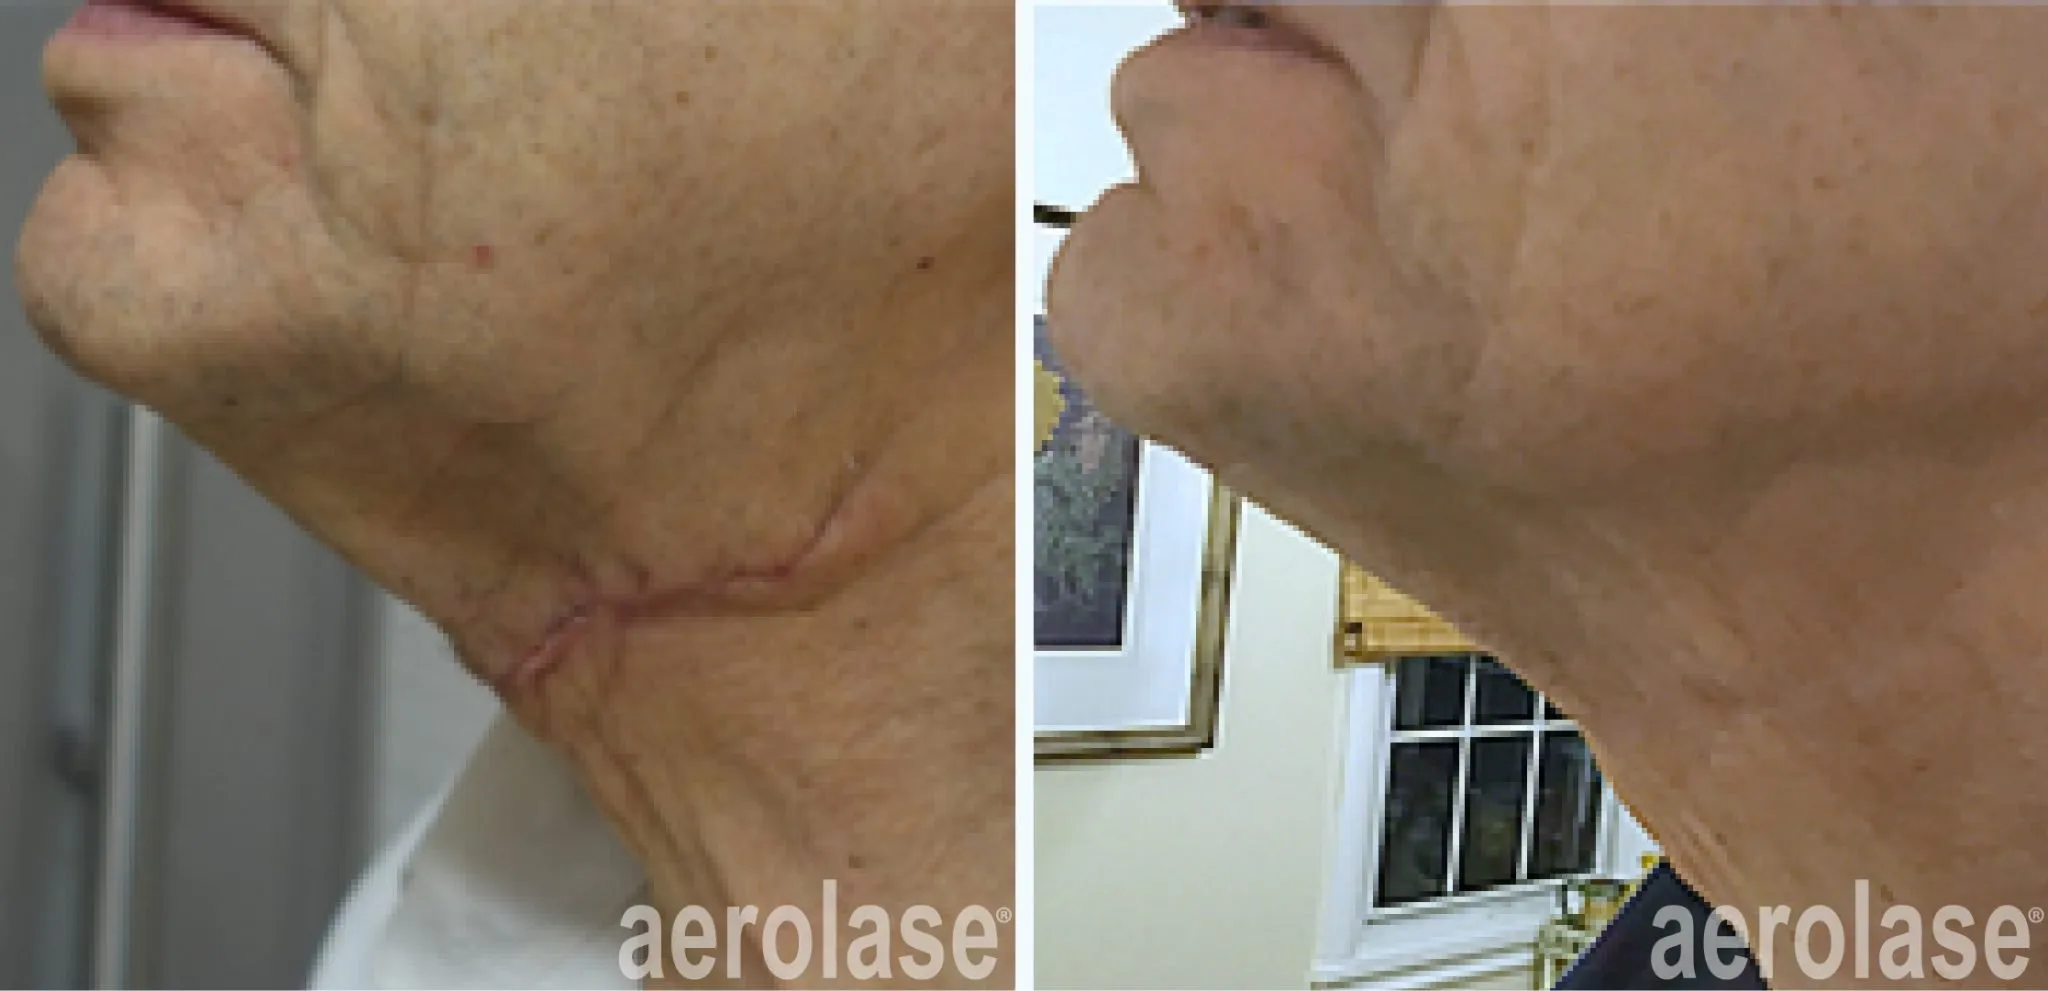 surgical-scar-before-and-after